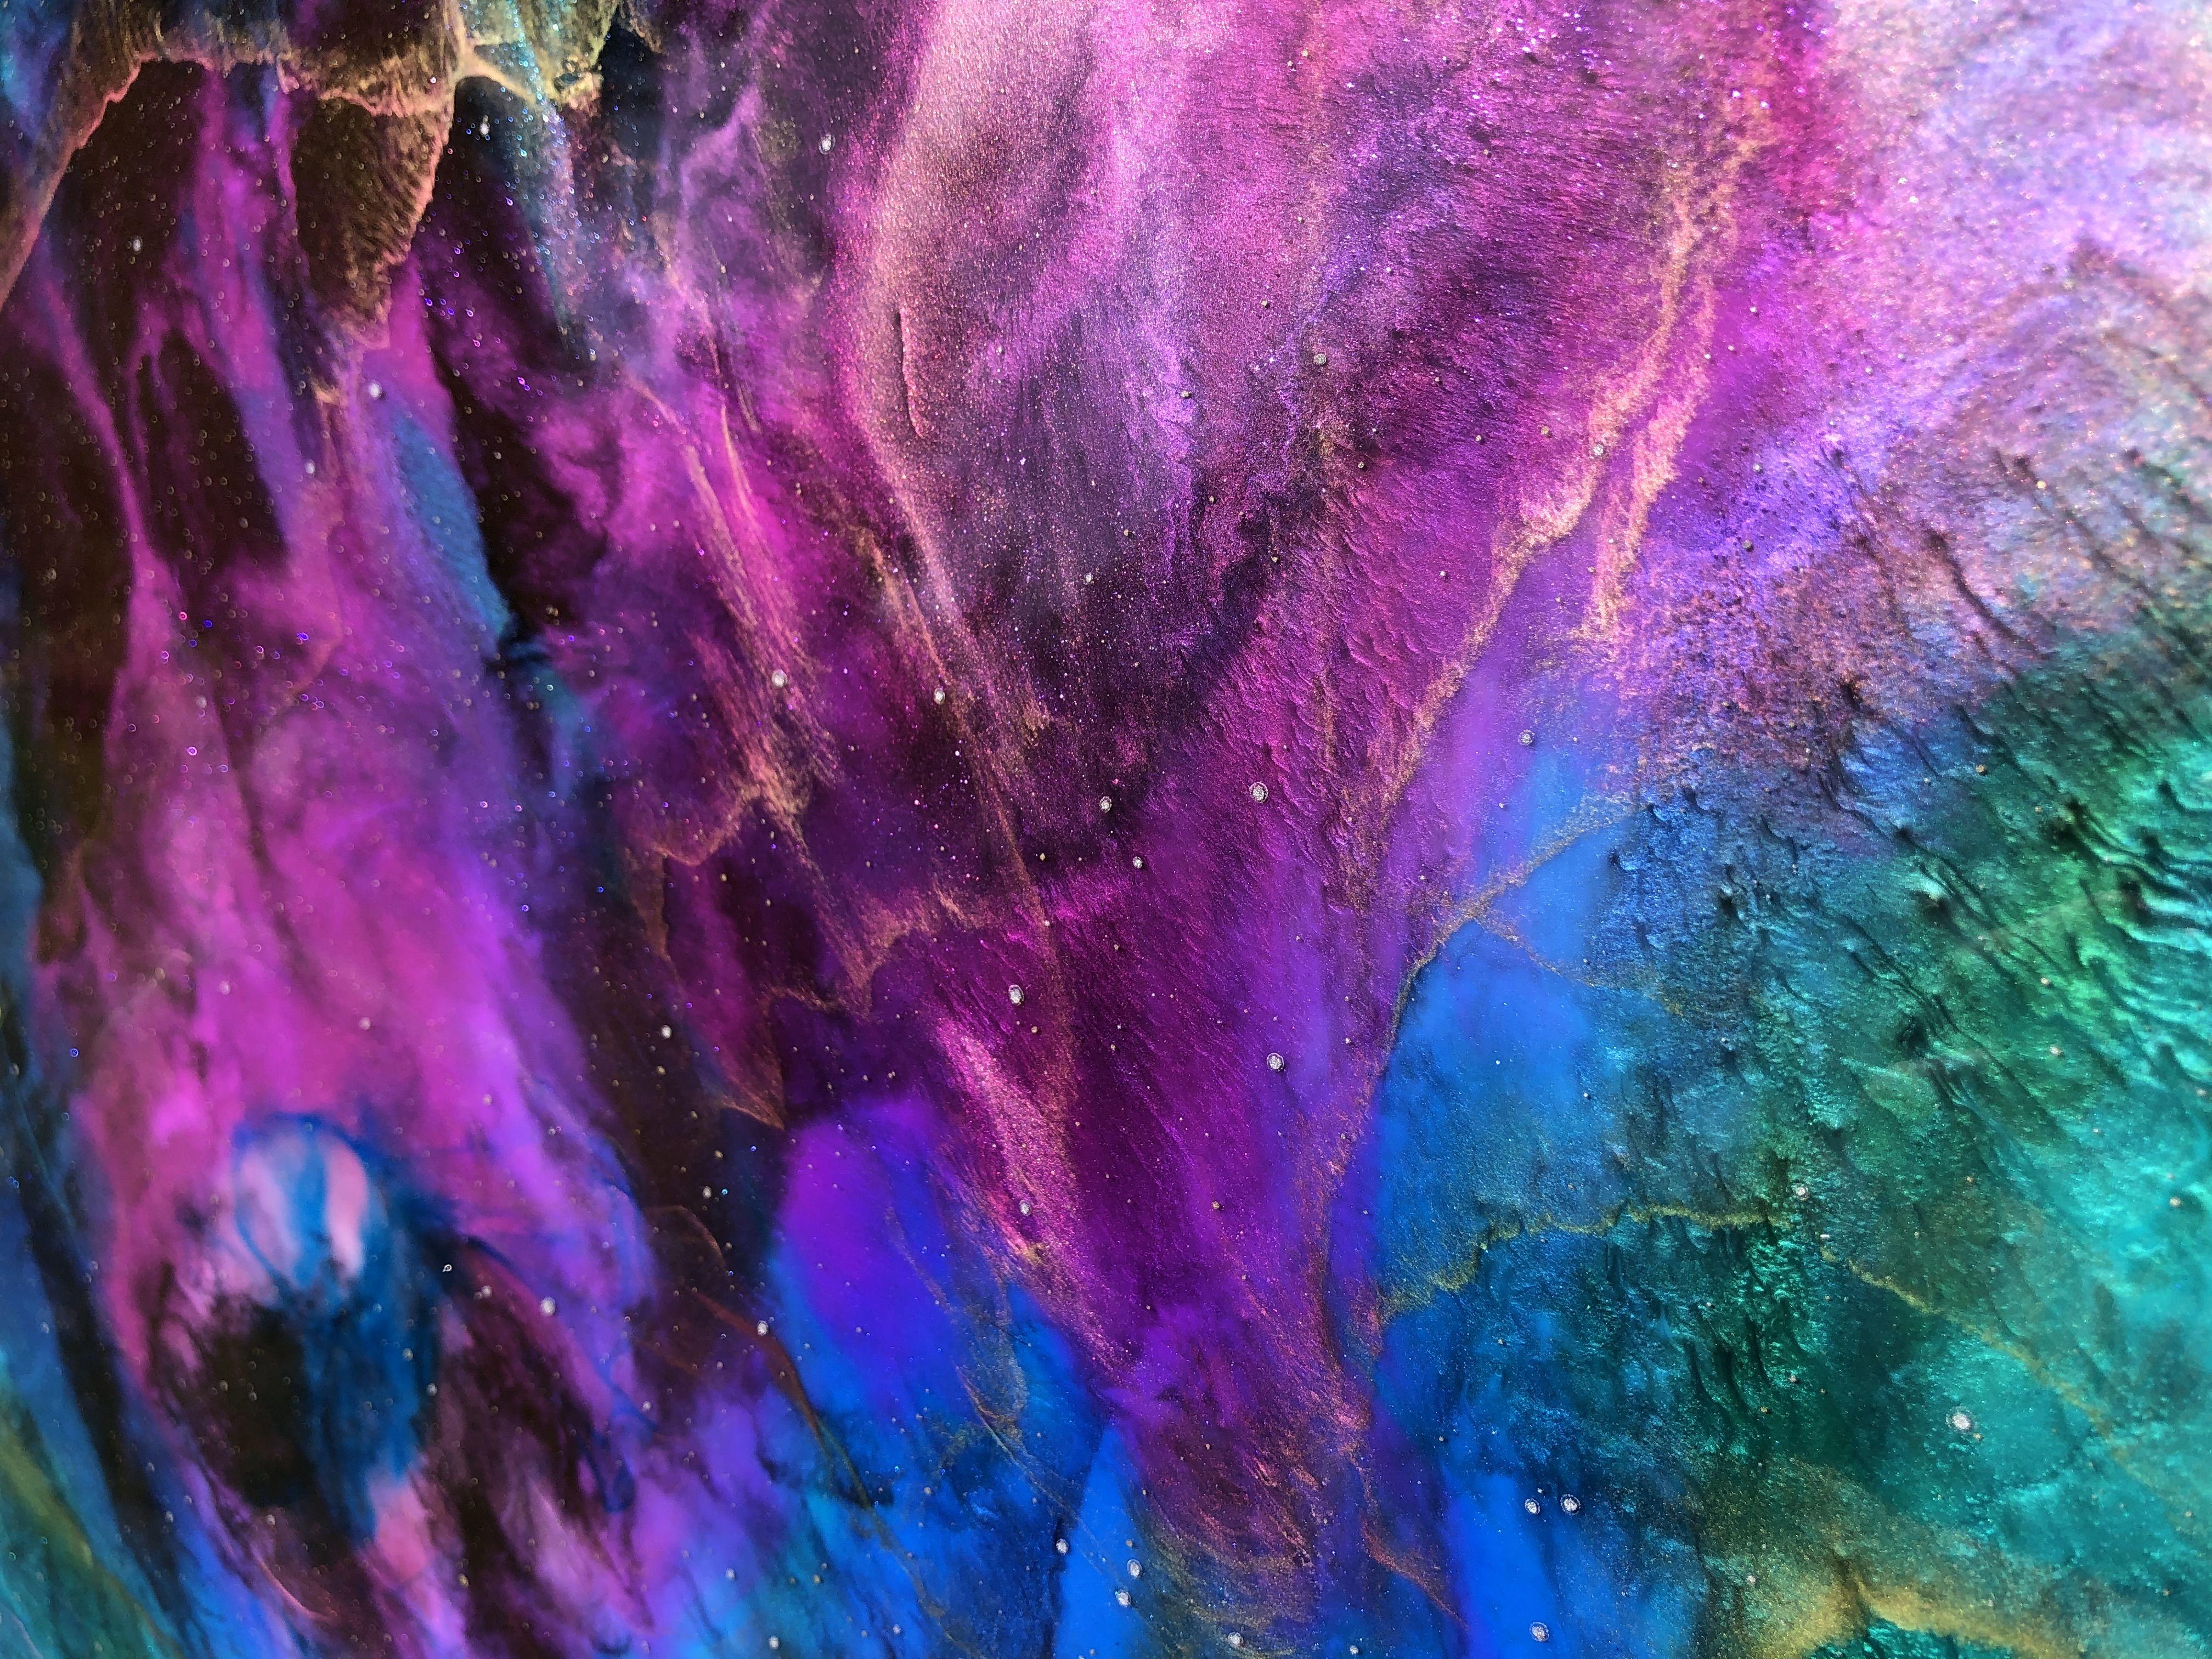 Tiffani employed her holographic resin painting technique to create the NALLORYA NEBULA, bursting with brilliant blue and purple hues, surrounded by swirling tendrils of electrifying metallic gold that seem to appear and disappear in the clouds.